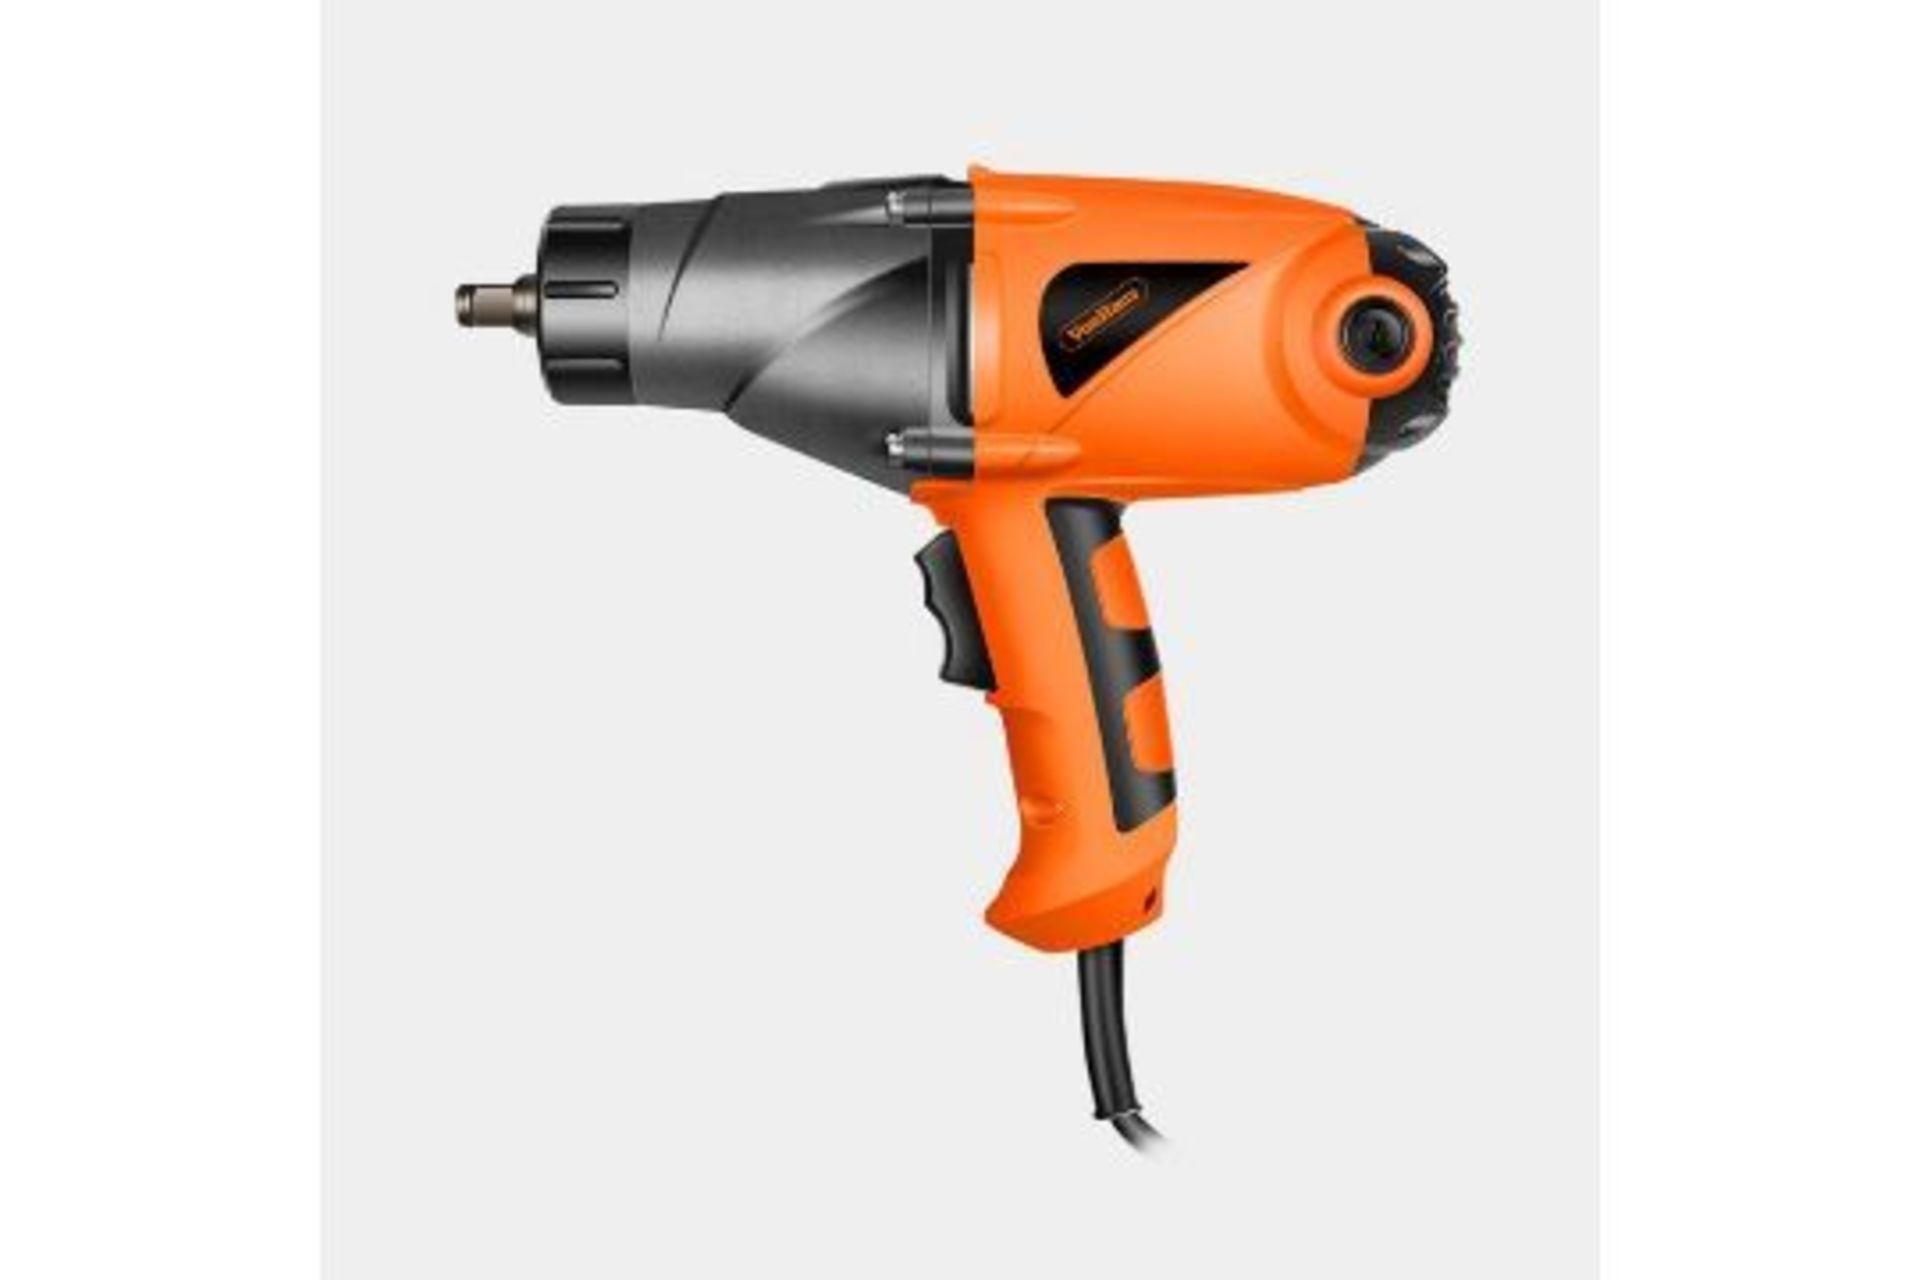 230V Impact Wrench with Square Drive. - R14.9. Make easy work of heavy duty applications with